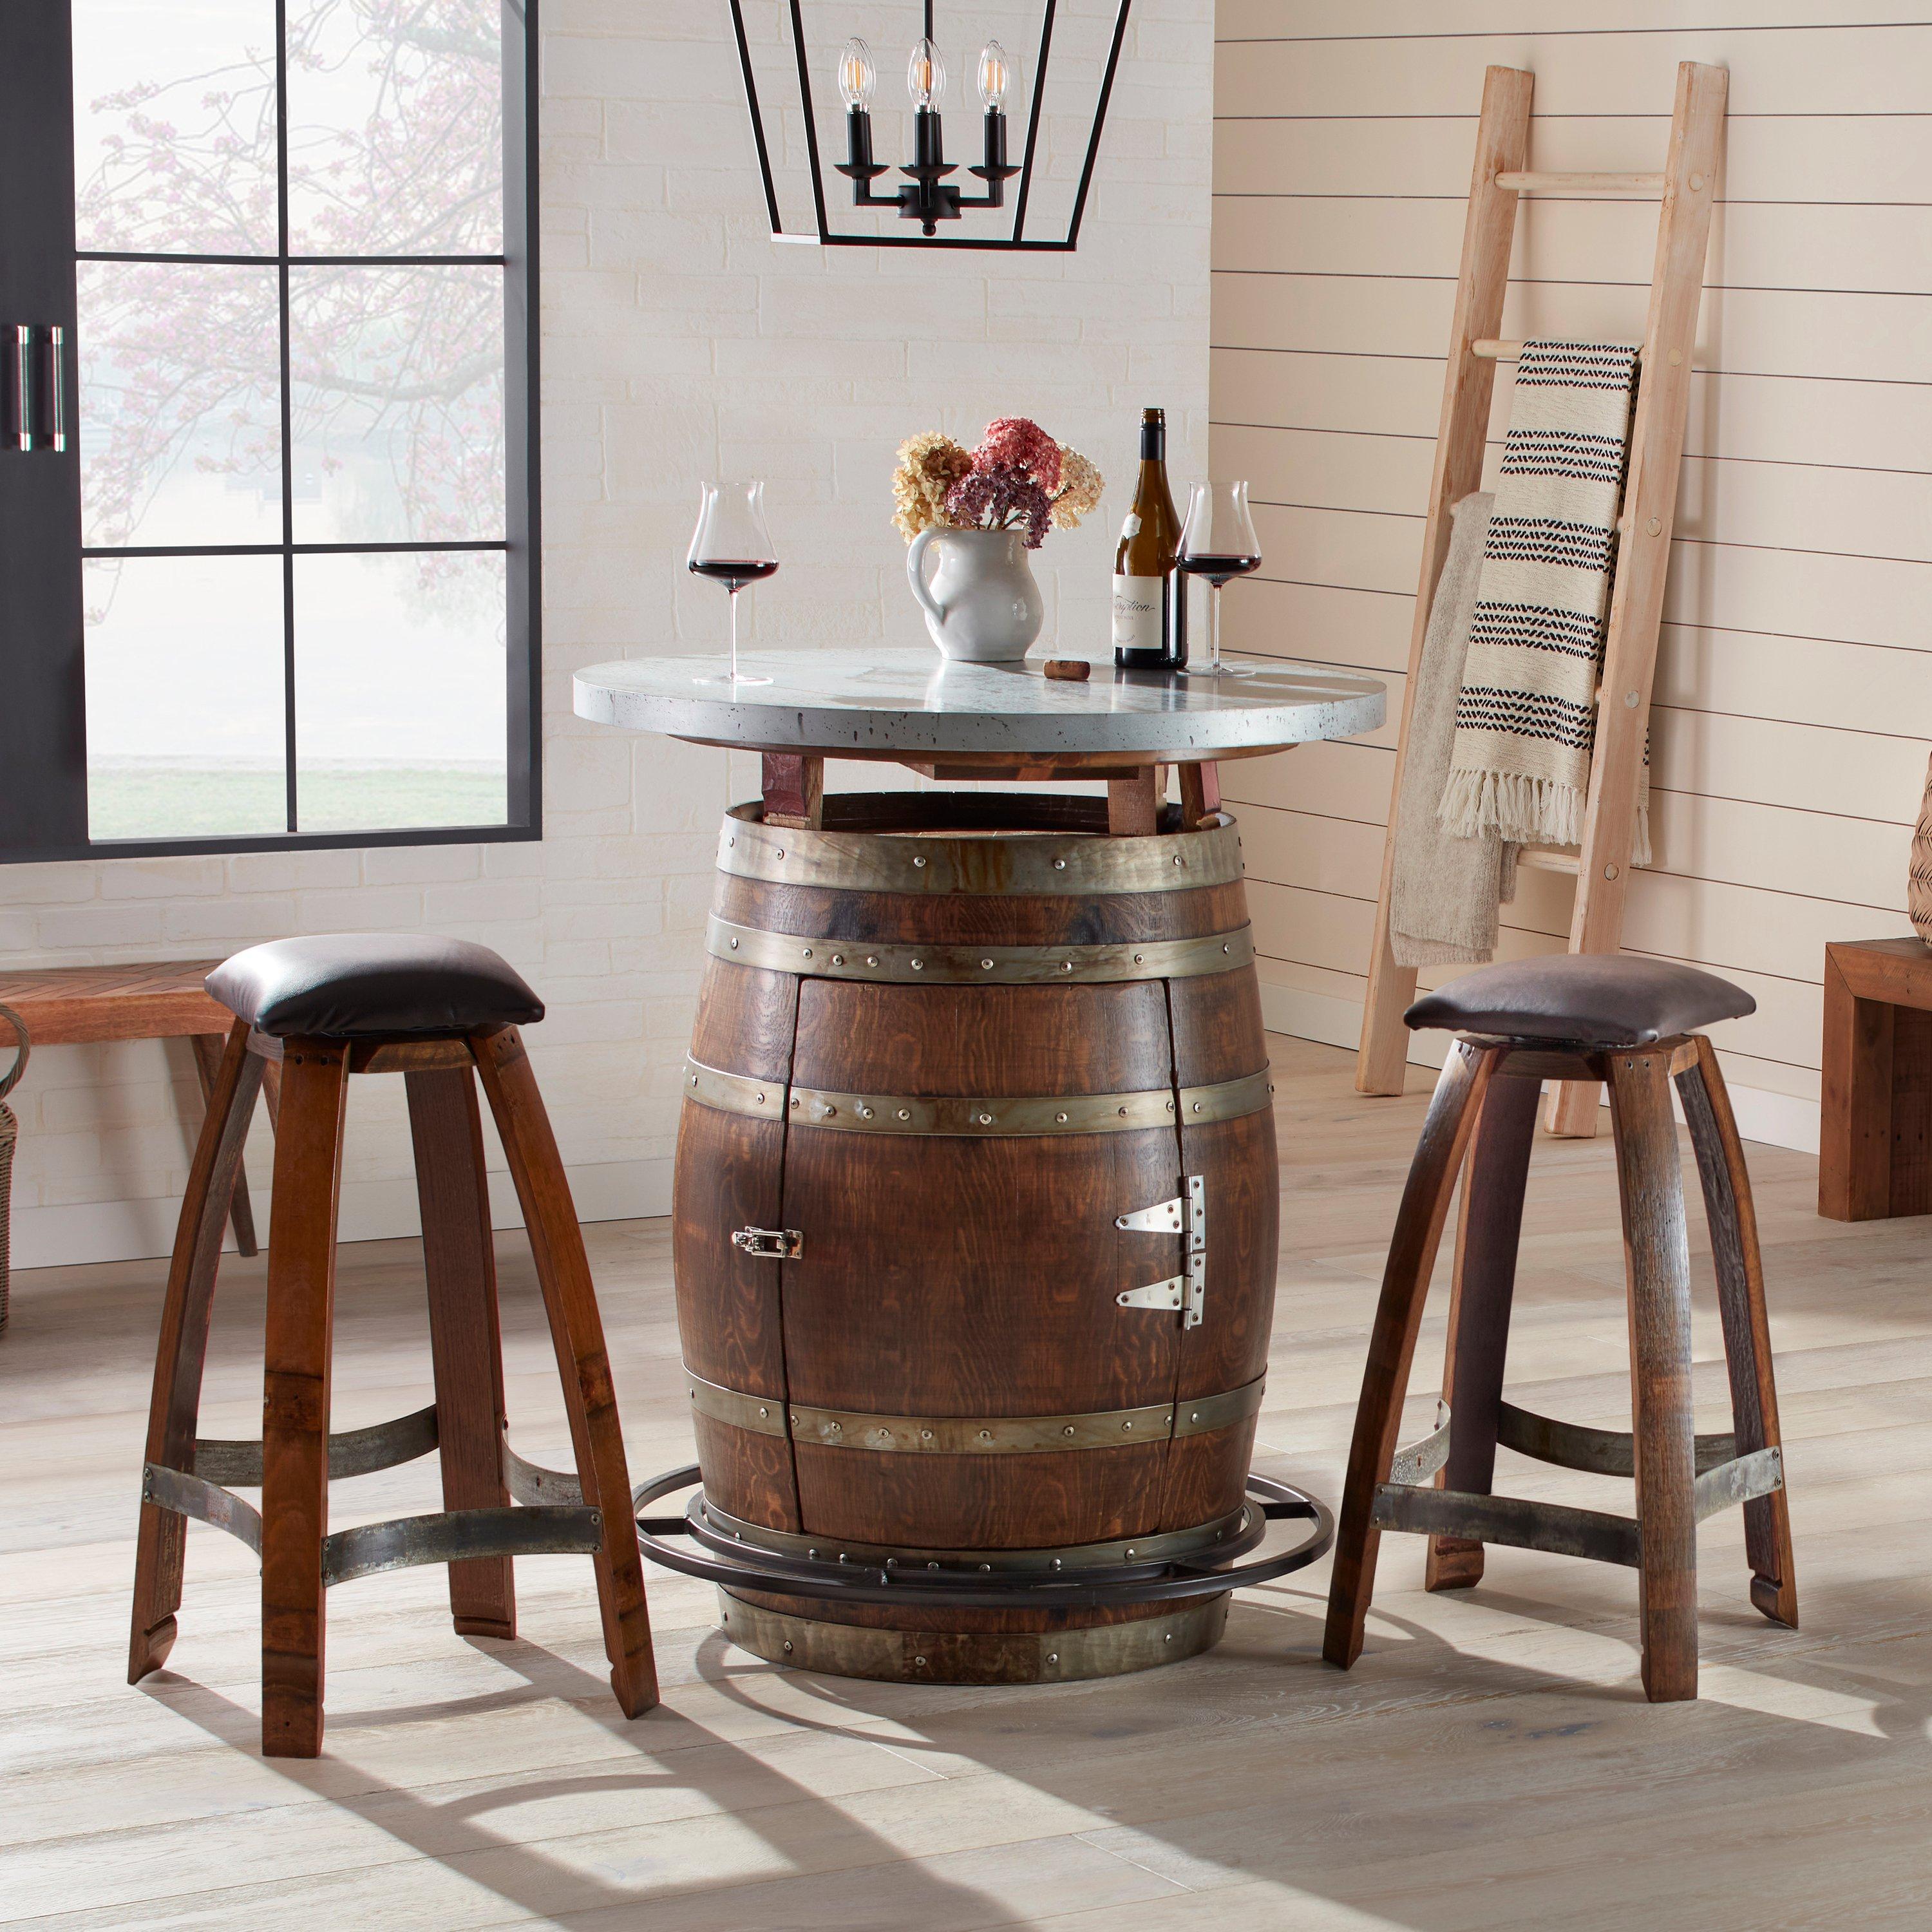 Wine Barrel Bistro Table Set With Customizable Tabletop - Zinc Top by Wine Enthusiast